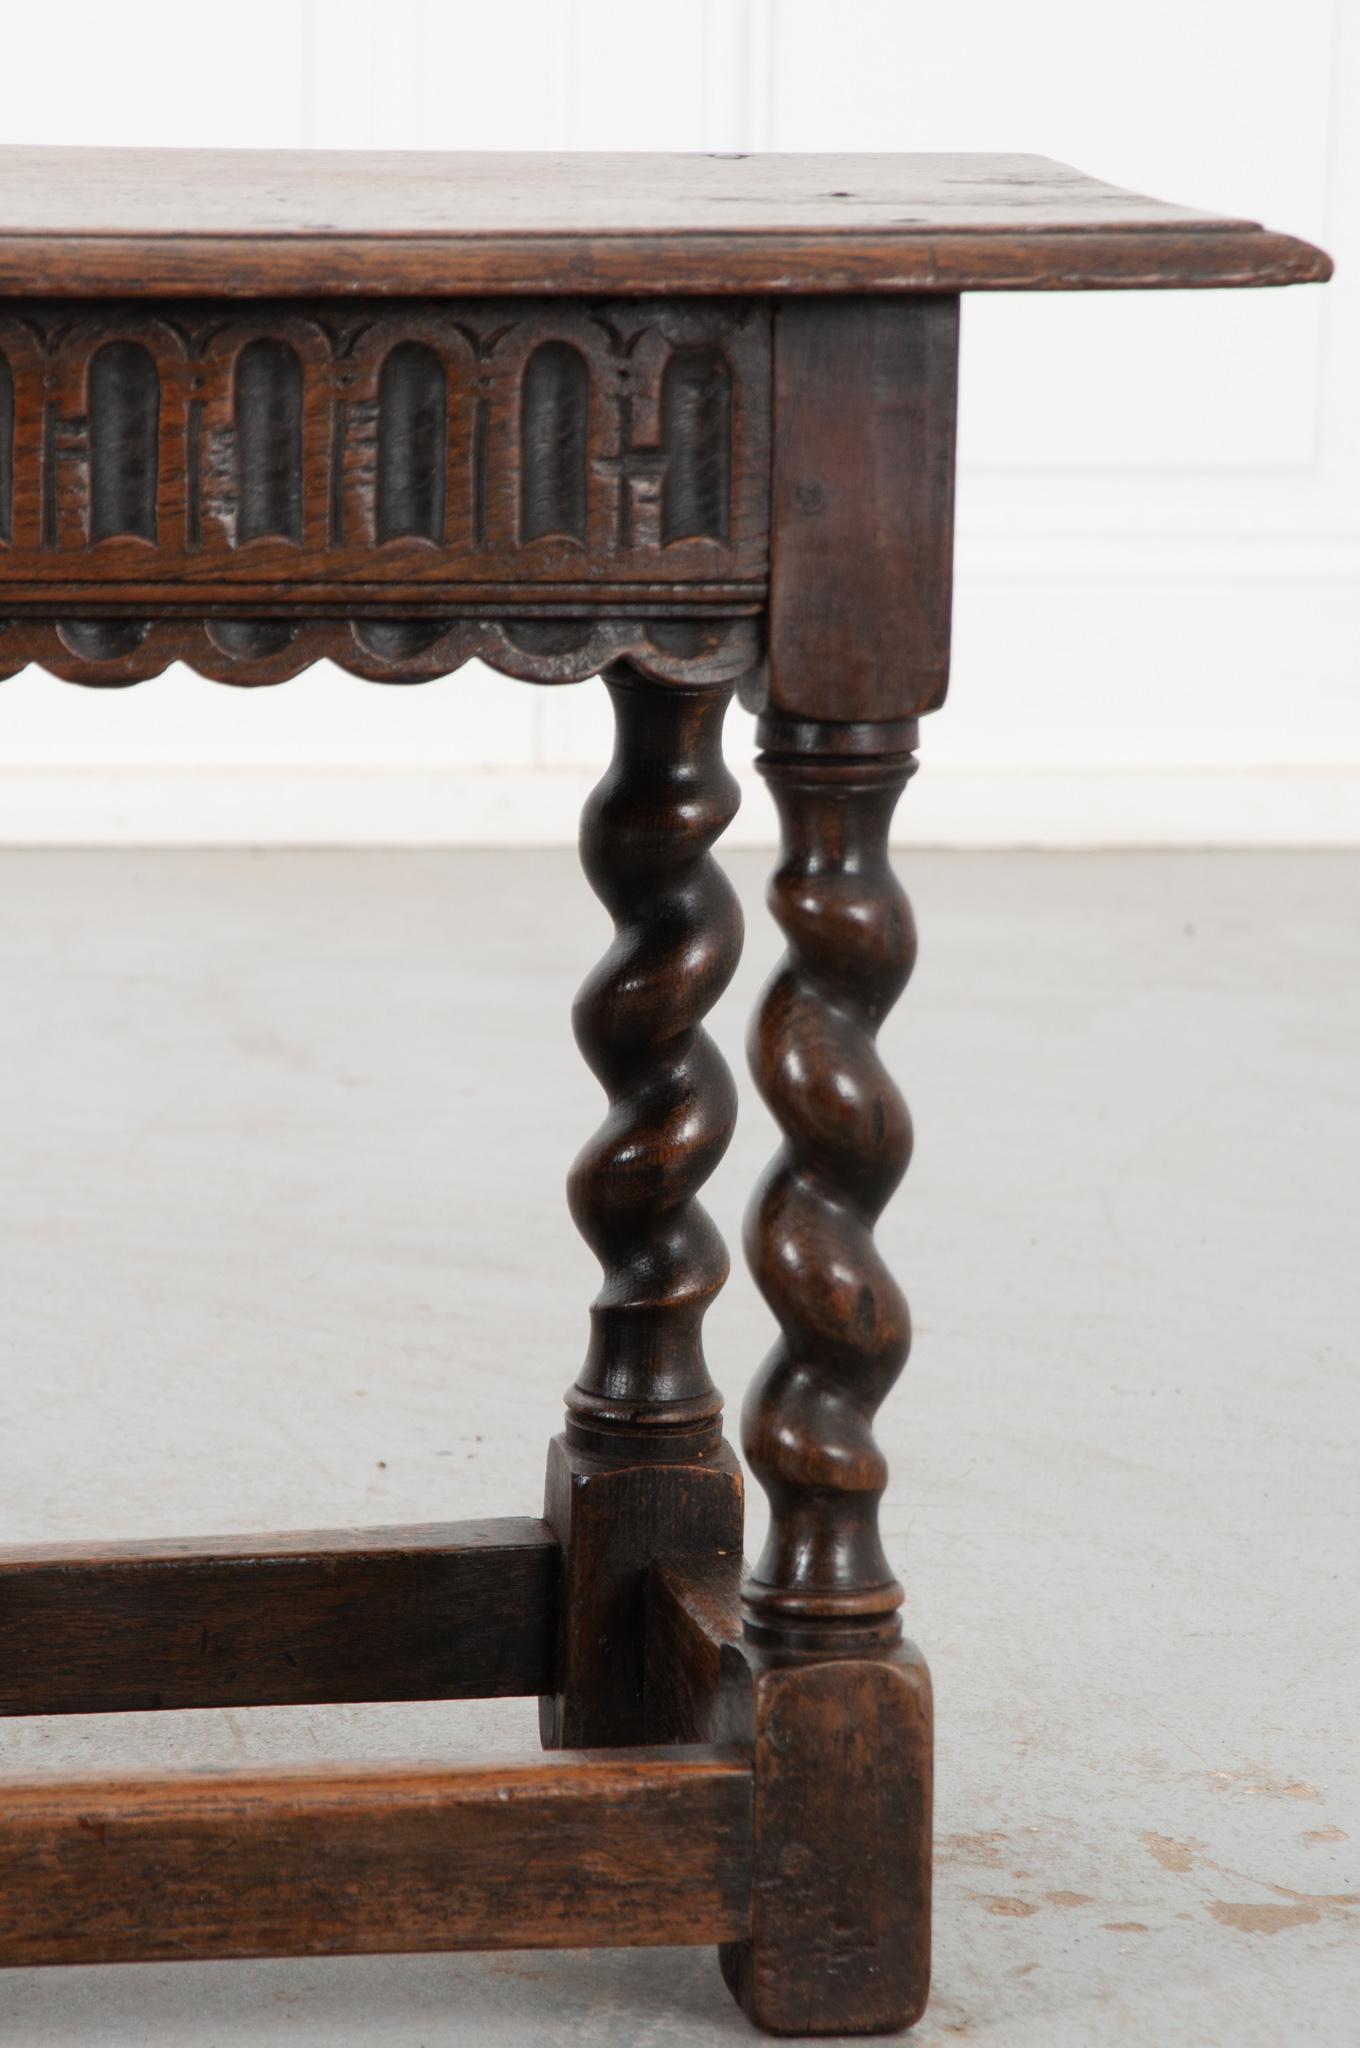 This beautiful dark oak bench is a fine example of 19th century English woodwork. The scalloped apron shows off a cathedral window motif. Six Barley Twist legs support the top of the bench, which has been well used and loved, please make sure to